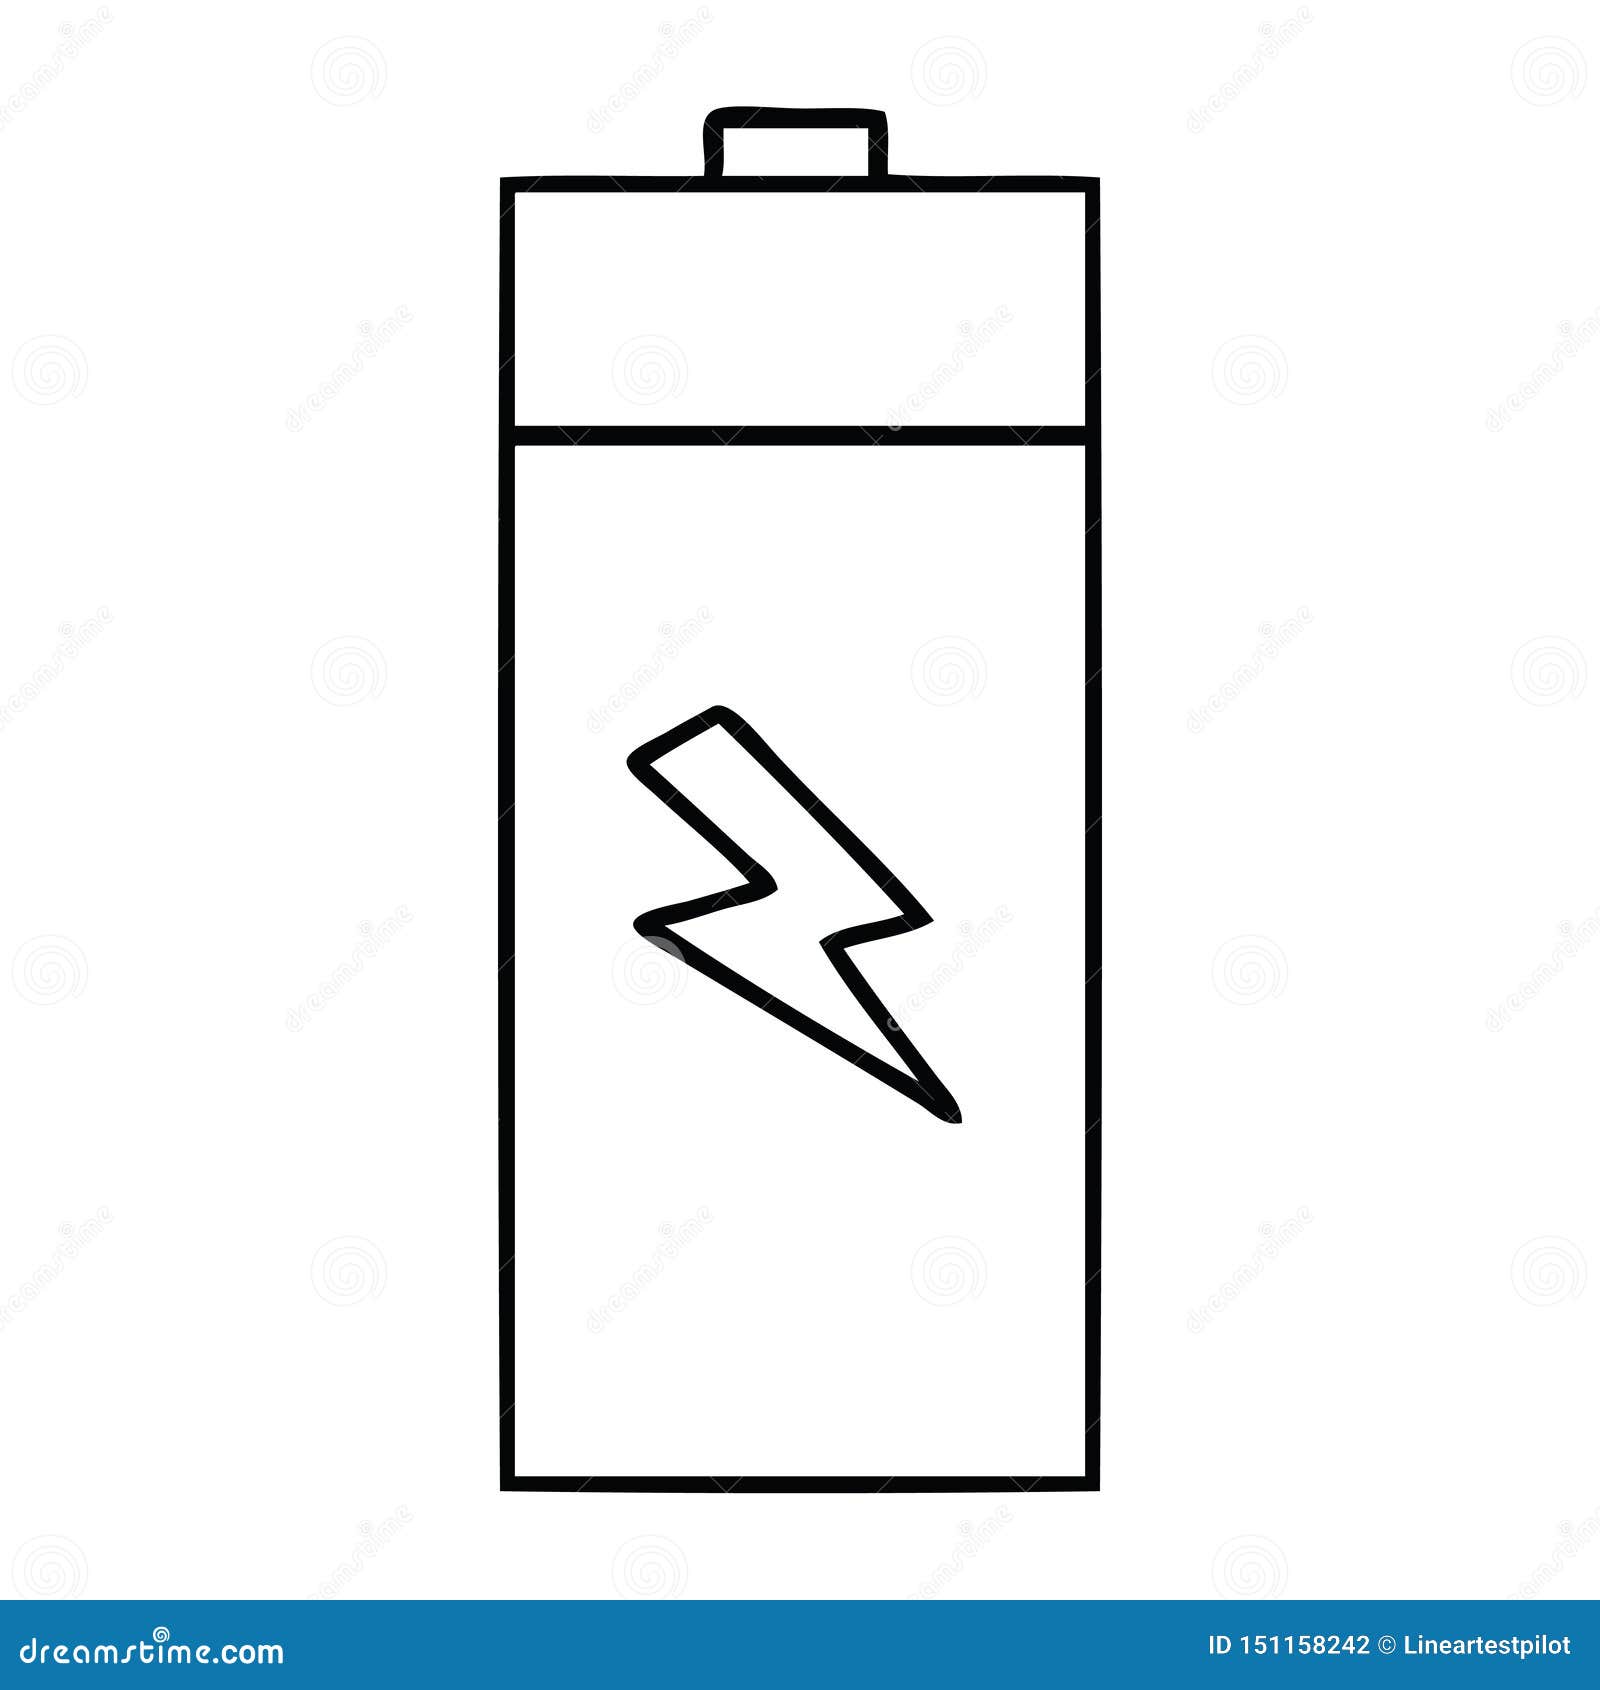 A Creative Line Drawing Cartoon Electrical Battery Stock Vector -  Illustration of clipart, quirky: 151158242